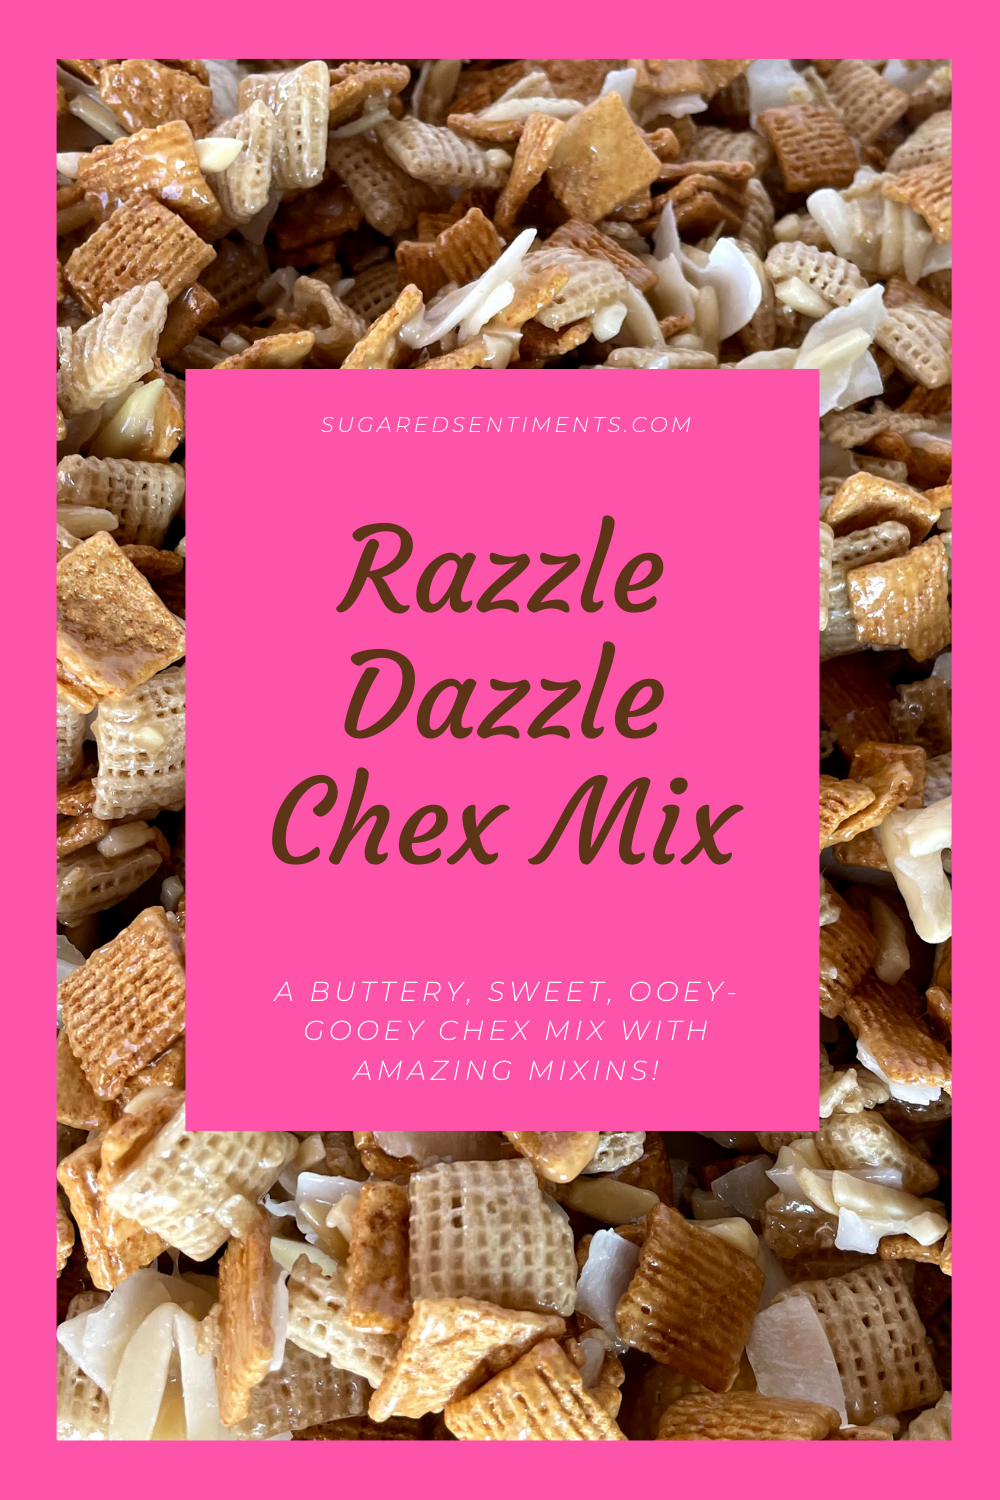 An ooey-gooey, sweet and buttery Chex Mix that will leave you wanting more.